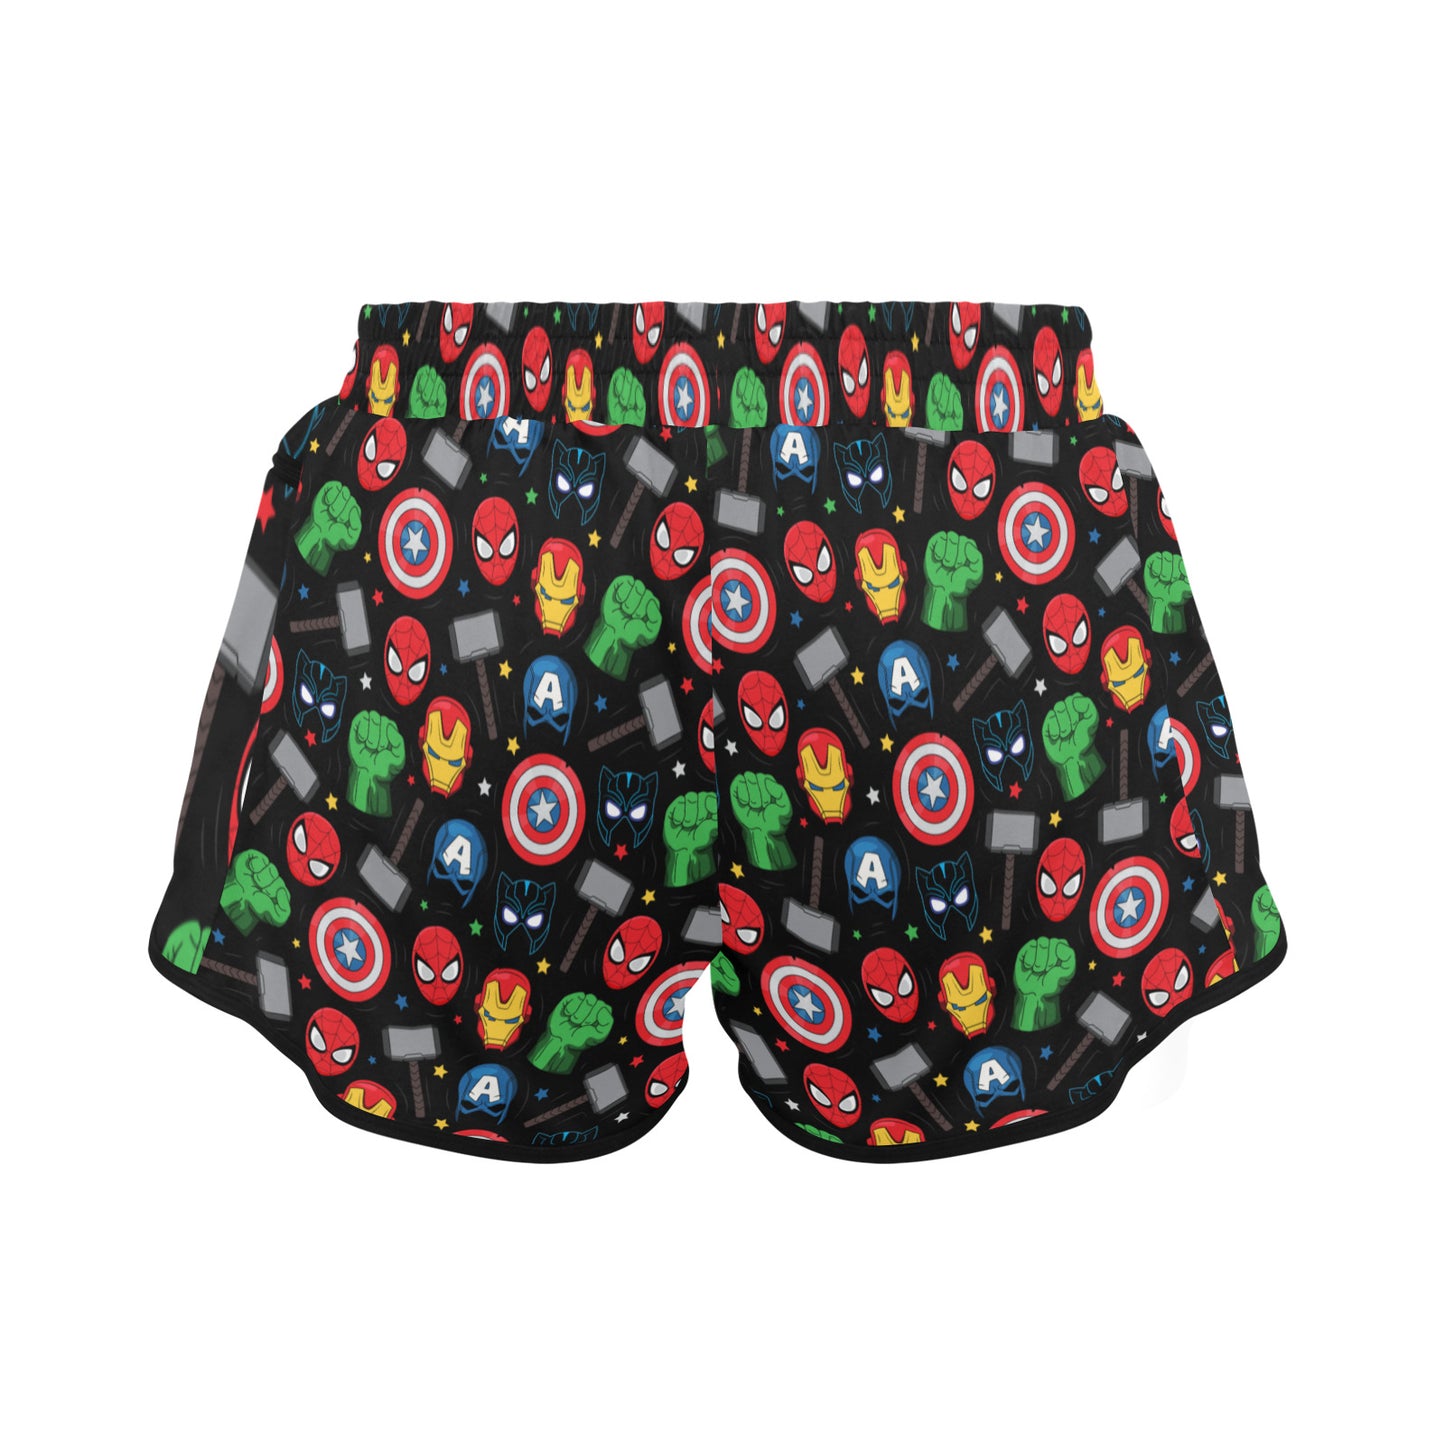 Super Heroes Women's Athletic Sports Shorts